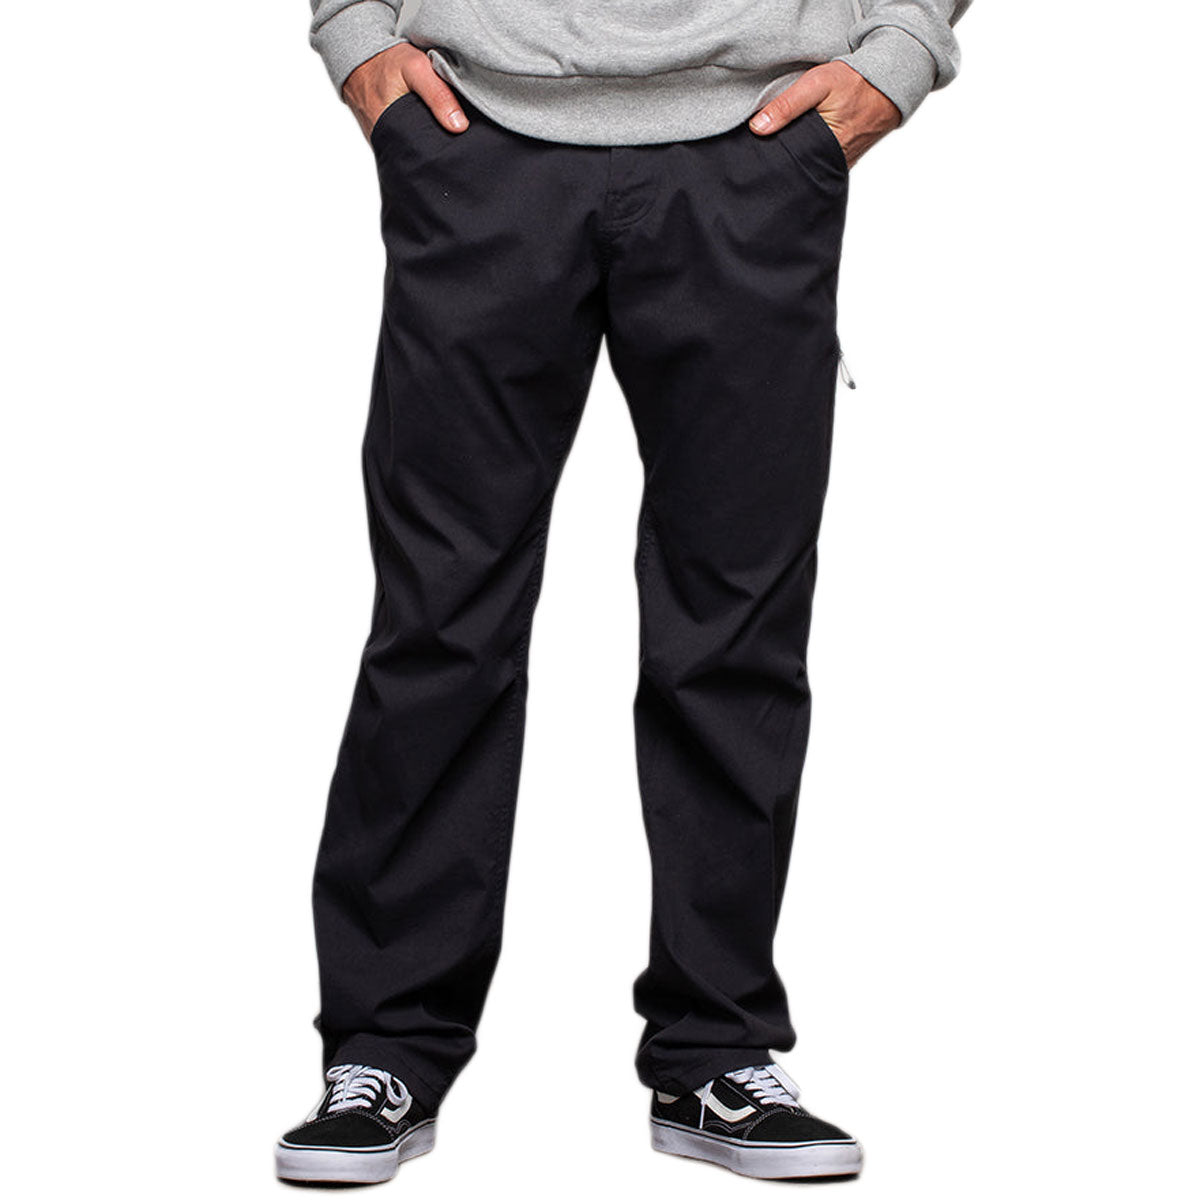 686 Everywhere Relaxed Pants - Black image 1